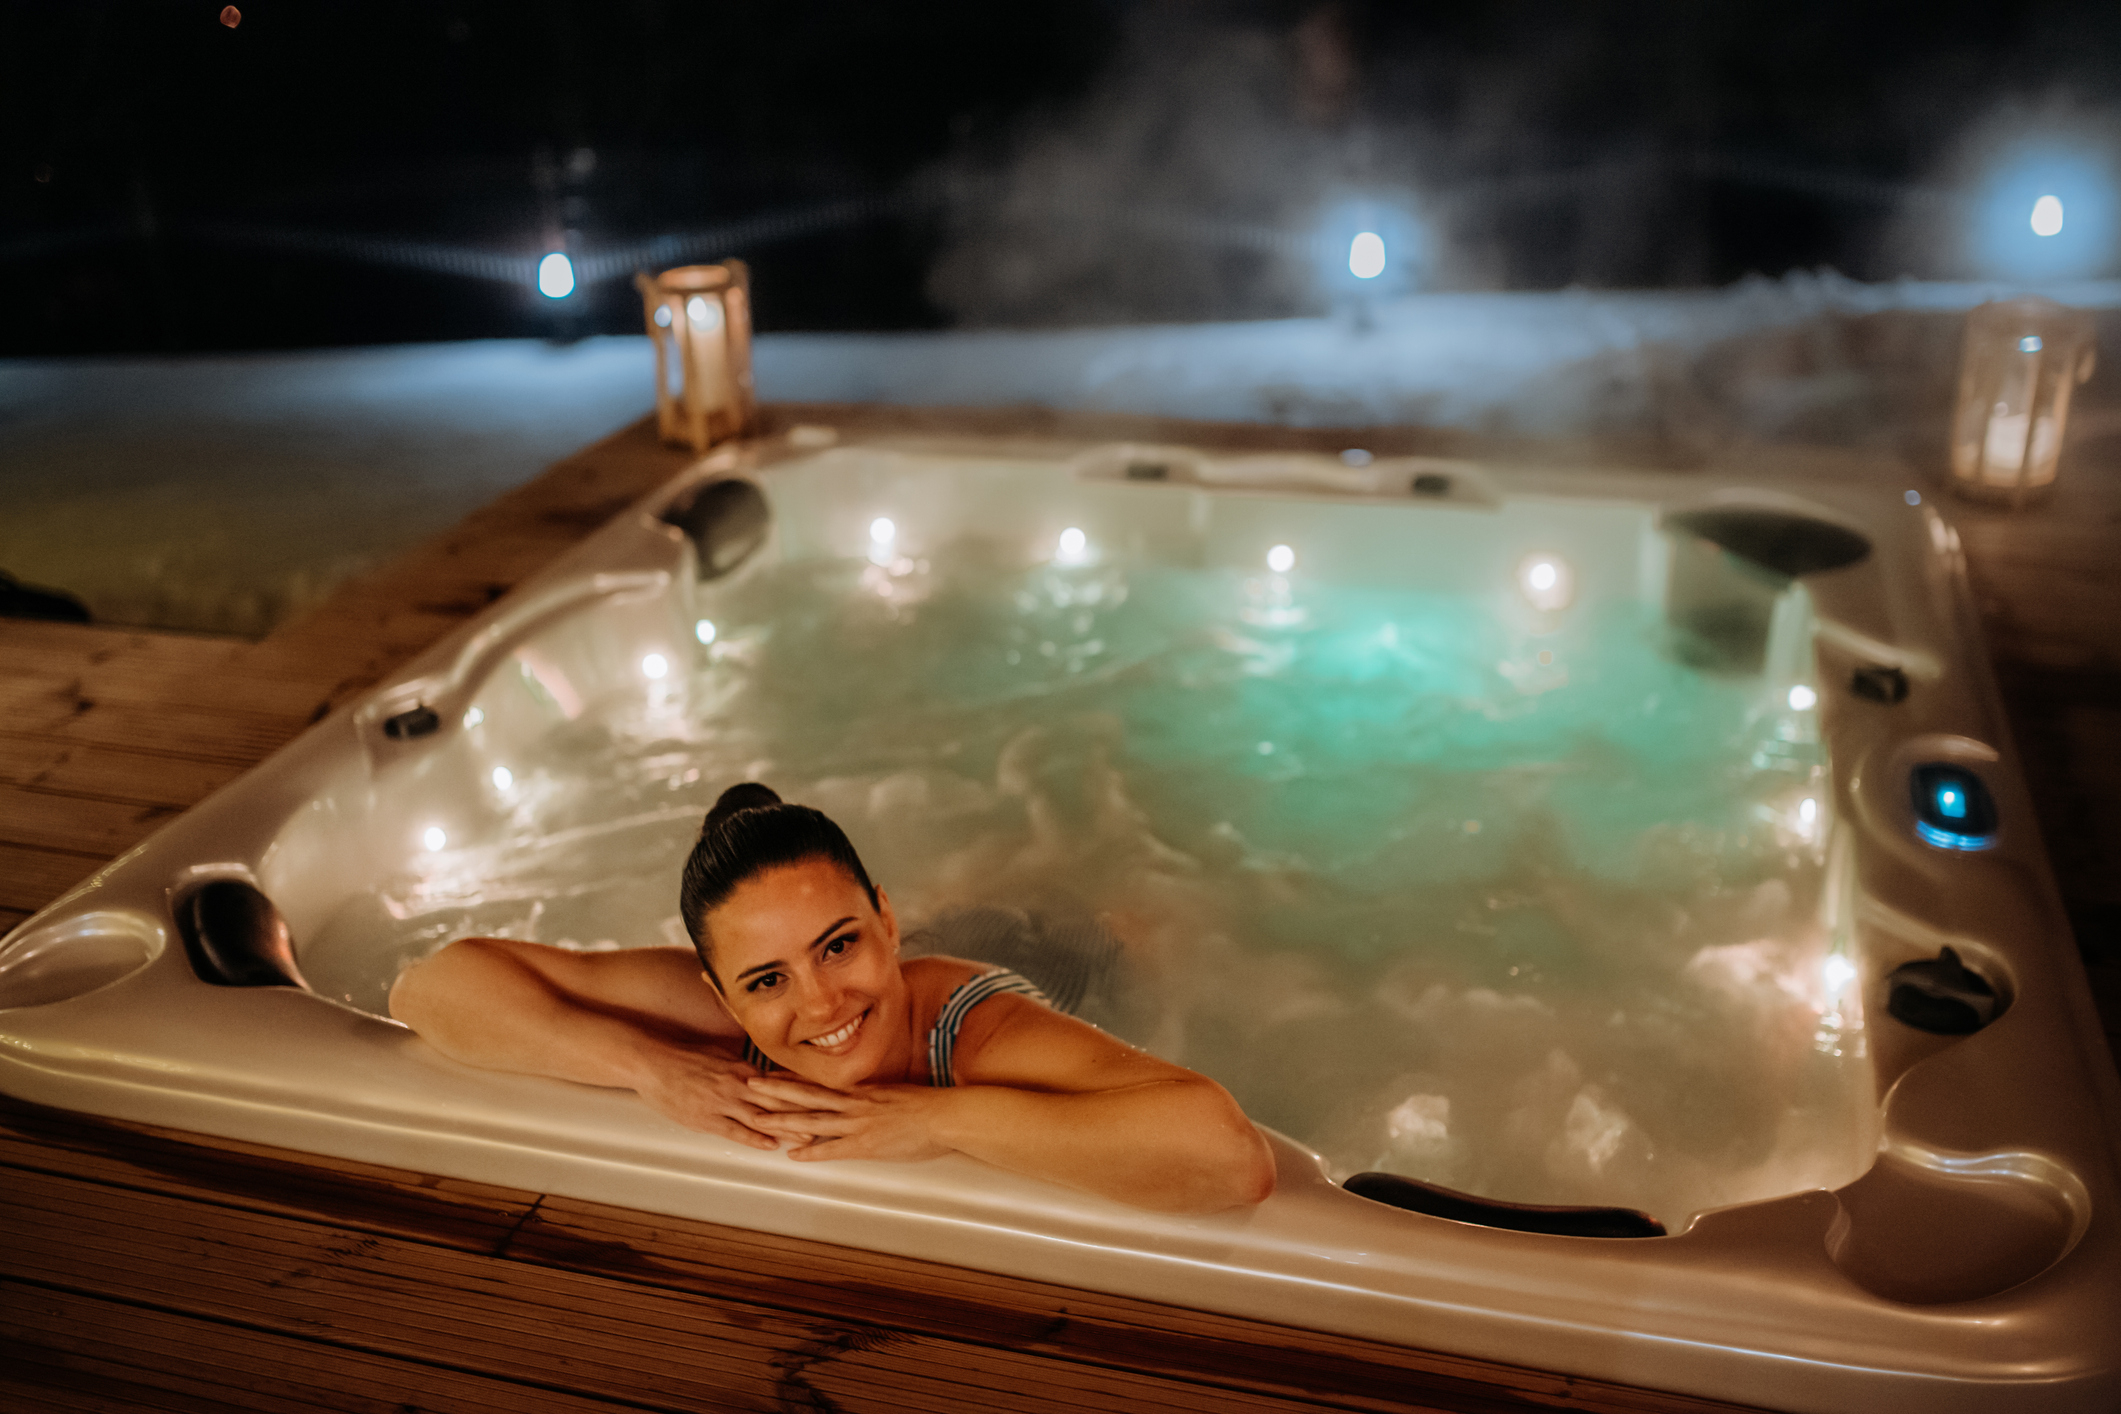 A smiling woman lounging in a hot tub